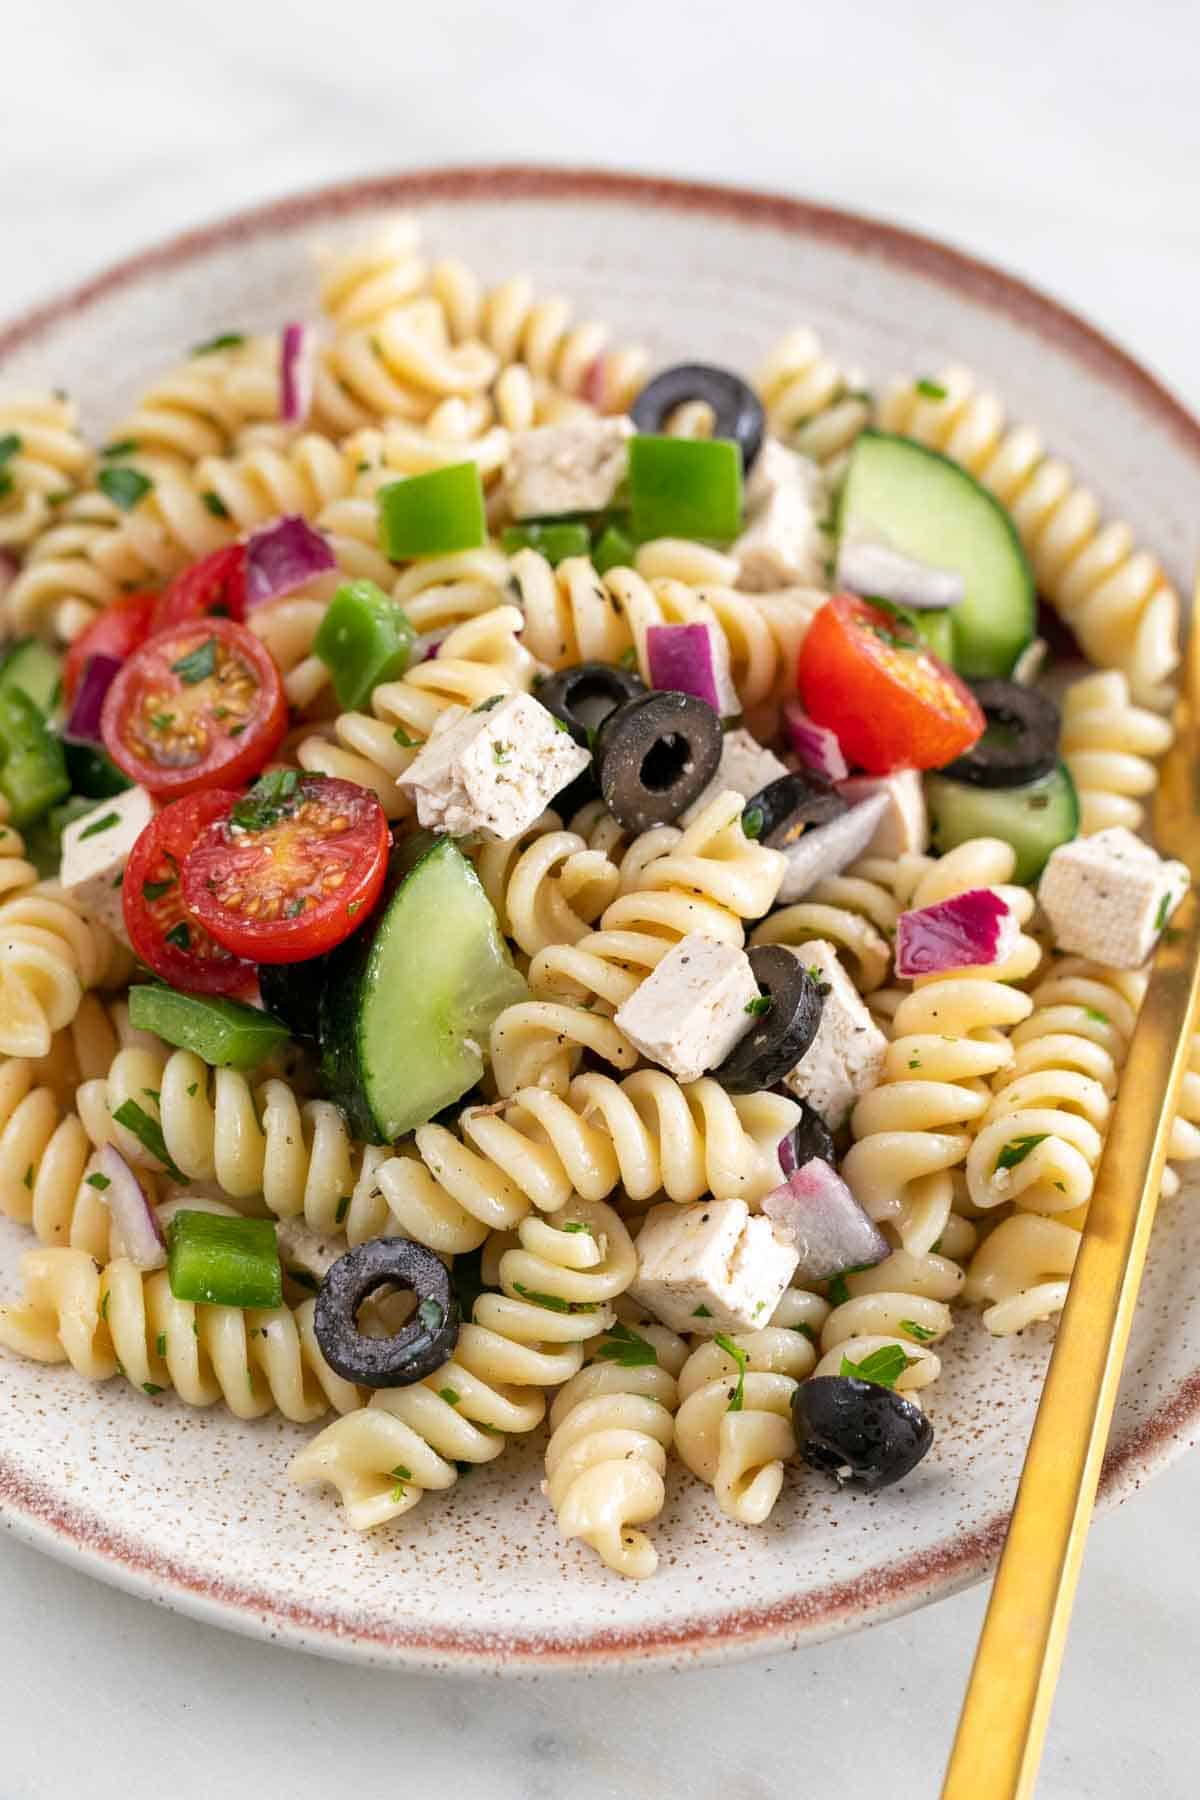 Serving of vegan pasta salad in a shallow dish, accompanied by a fork.